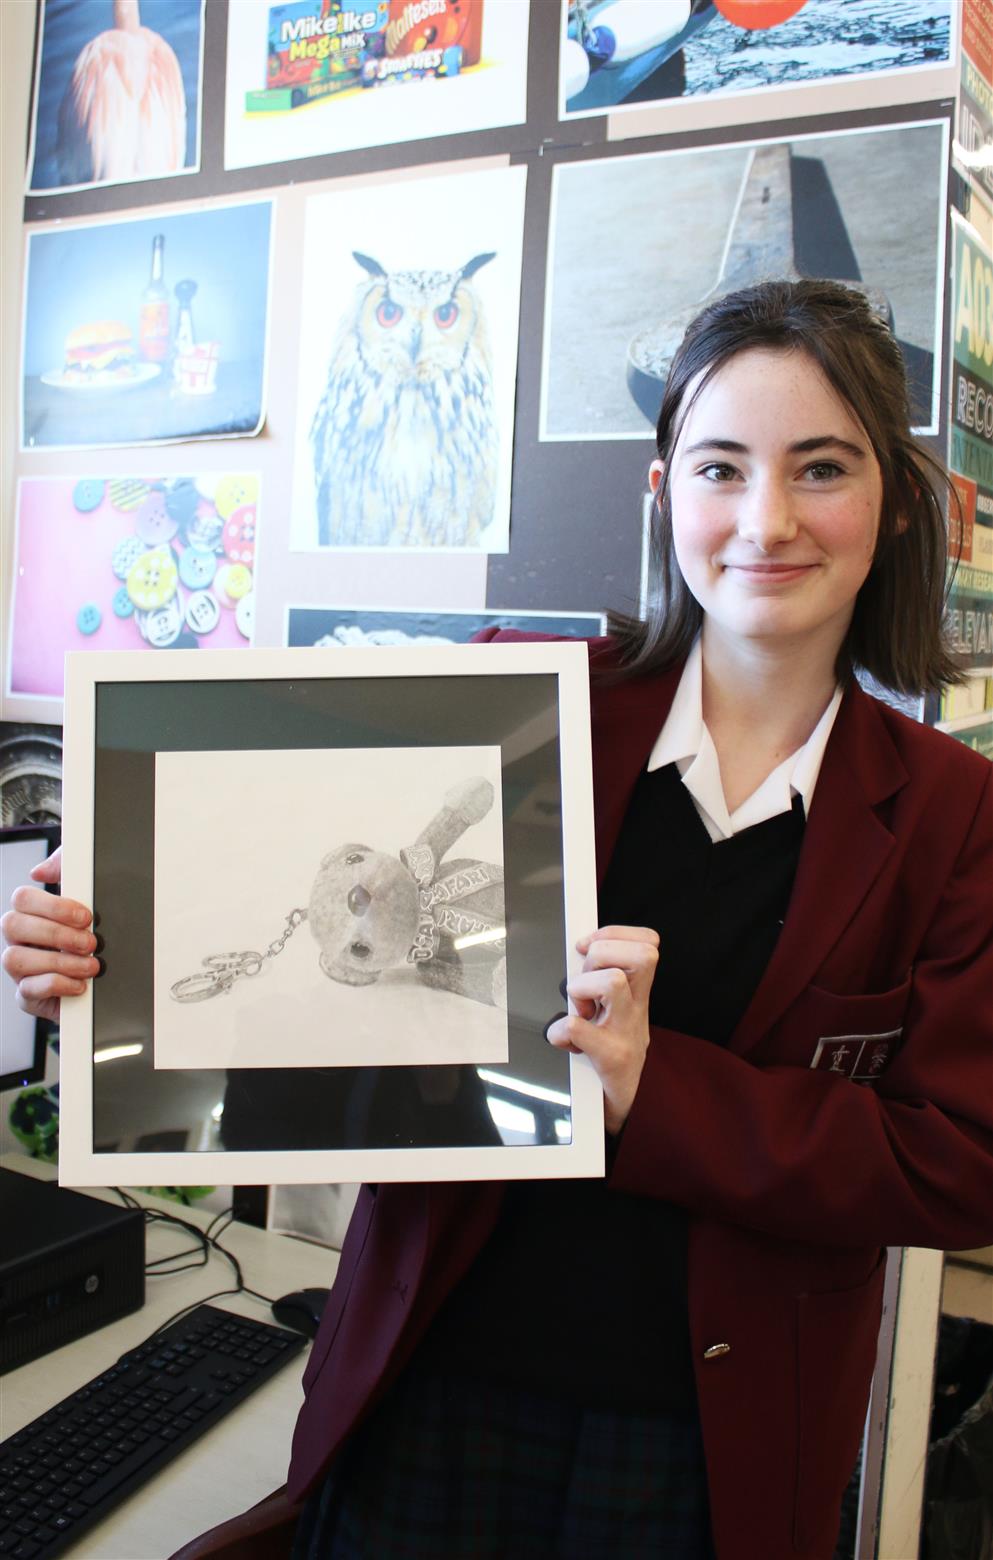 Year 10 student Grace shortlisted in United Learning International Schools Art competition